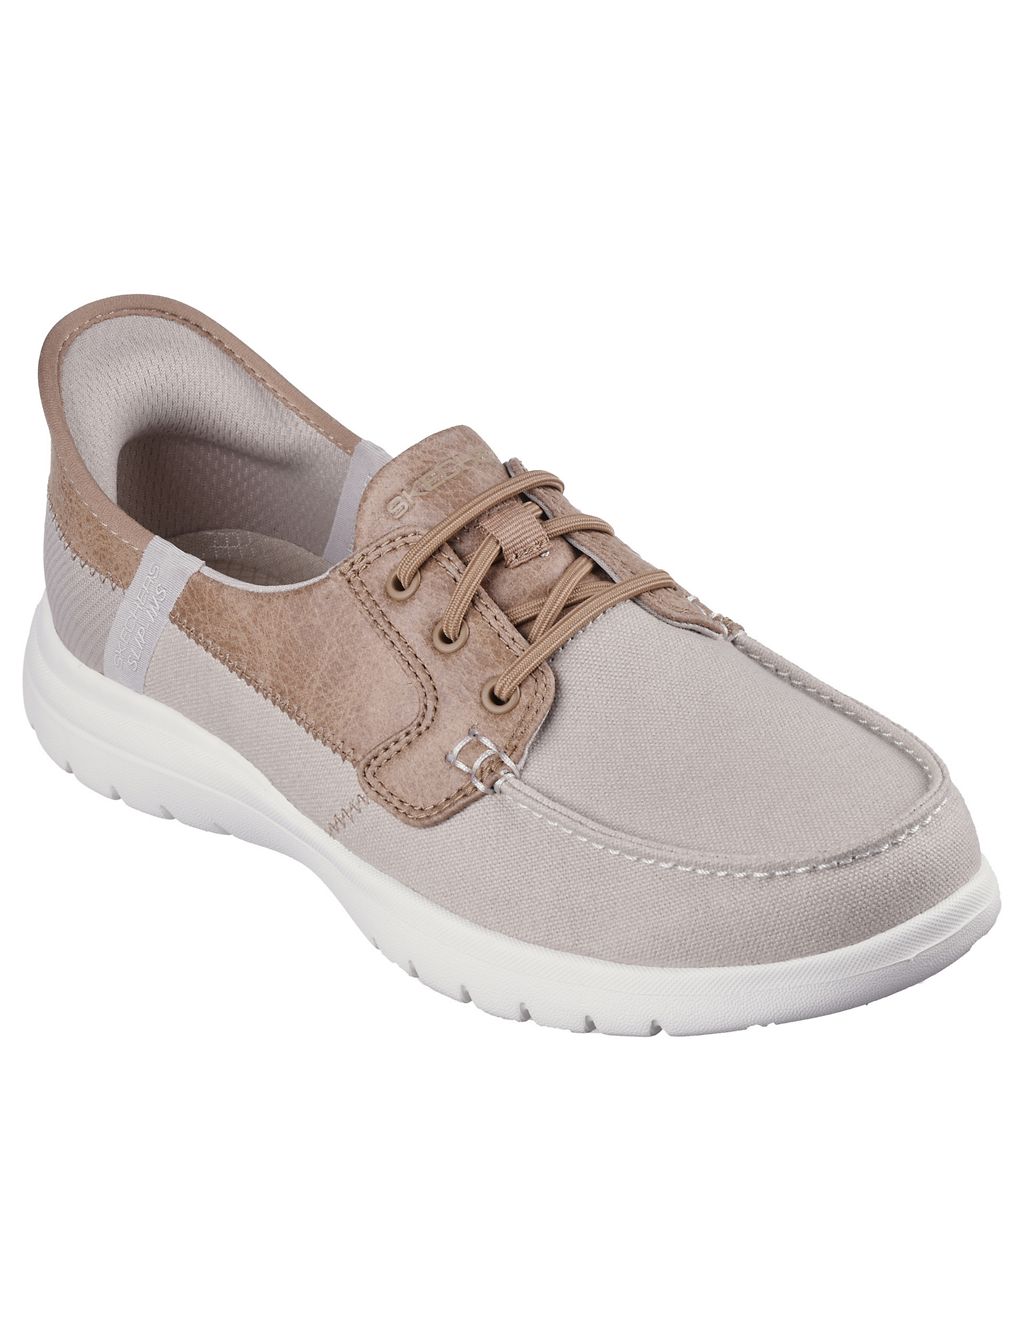 On-The-Go Flex Palmilla Lace Up Boat Shoes 1 of 6